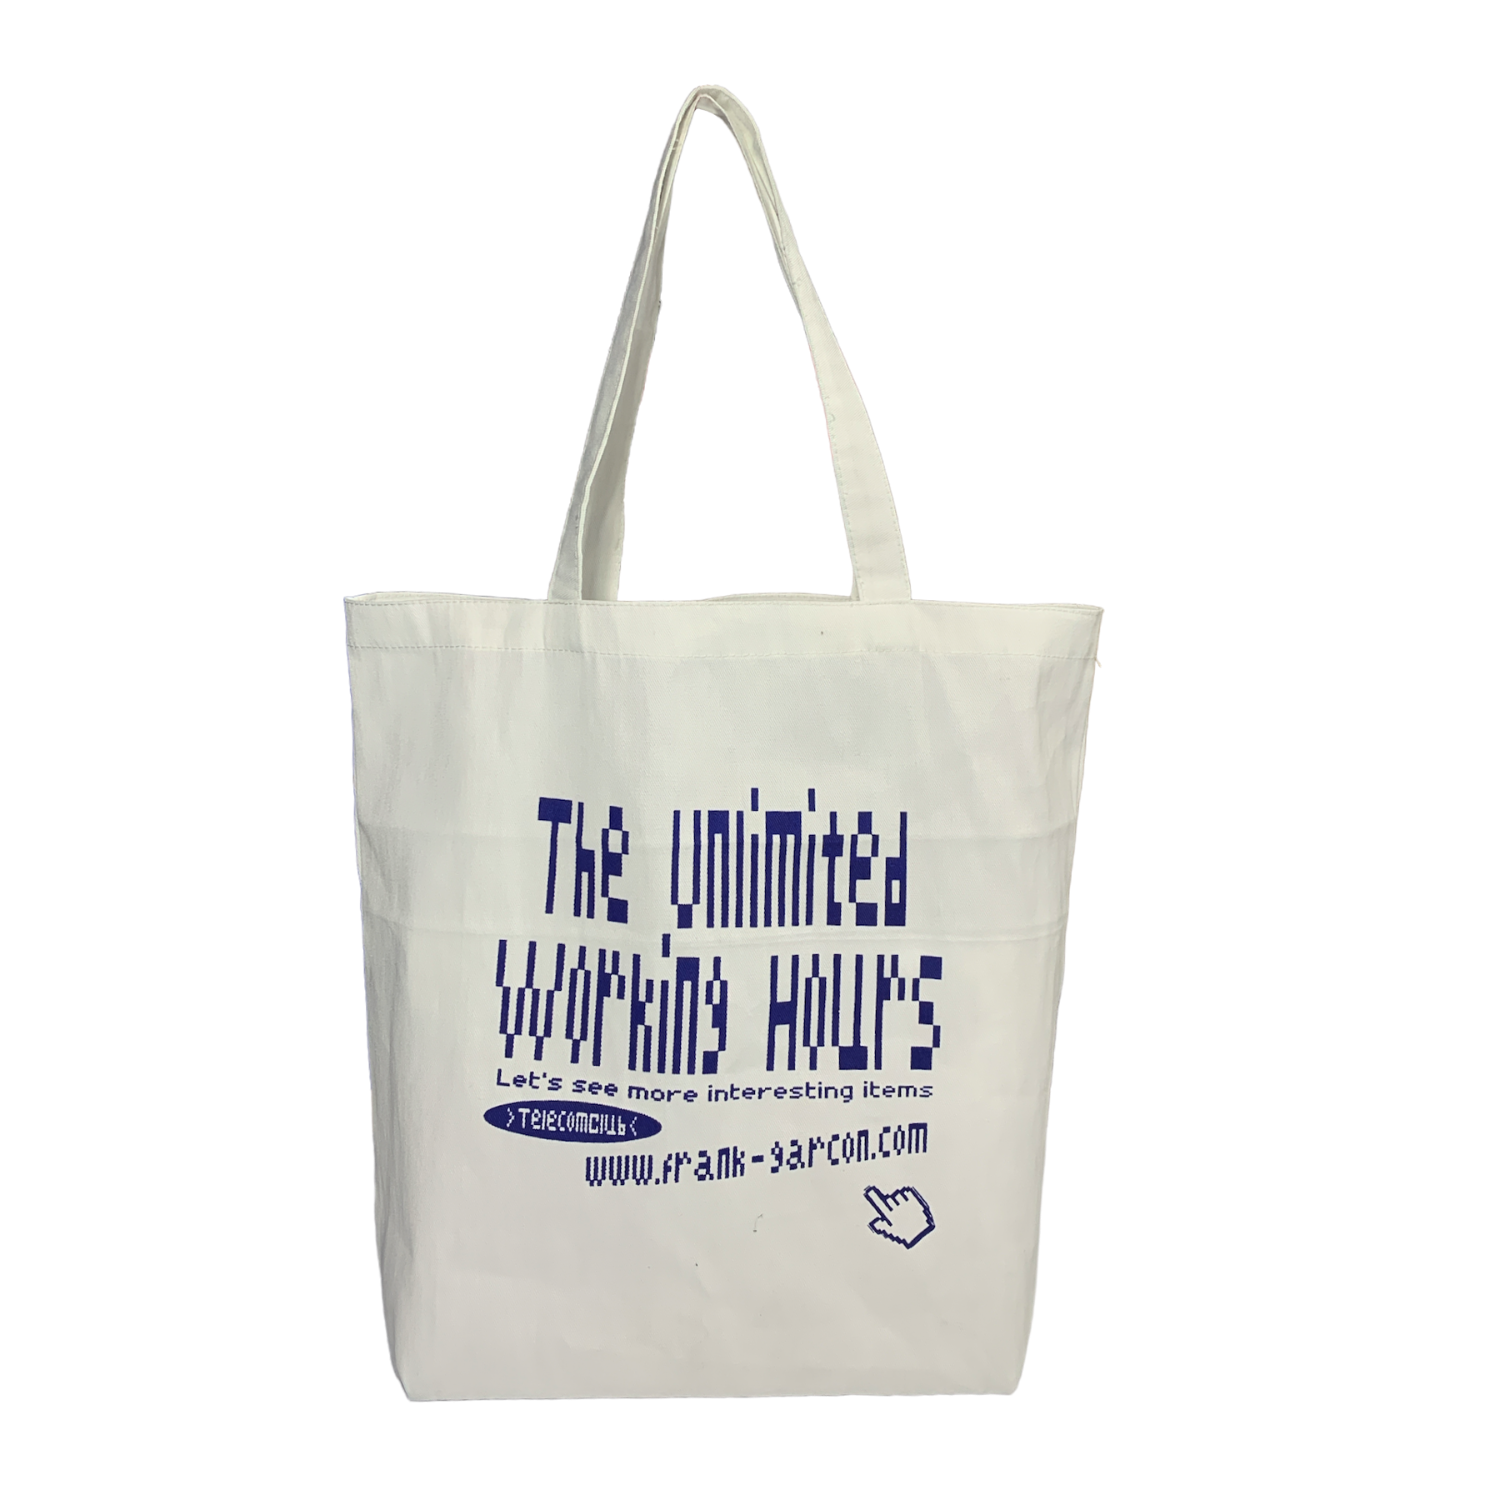 WORKING HOURS TOTE BAG